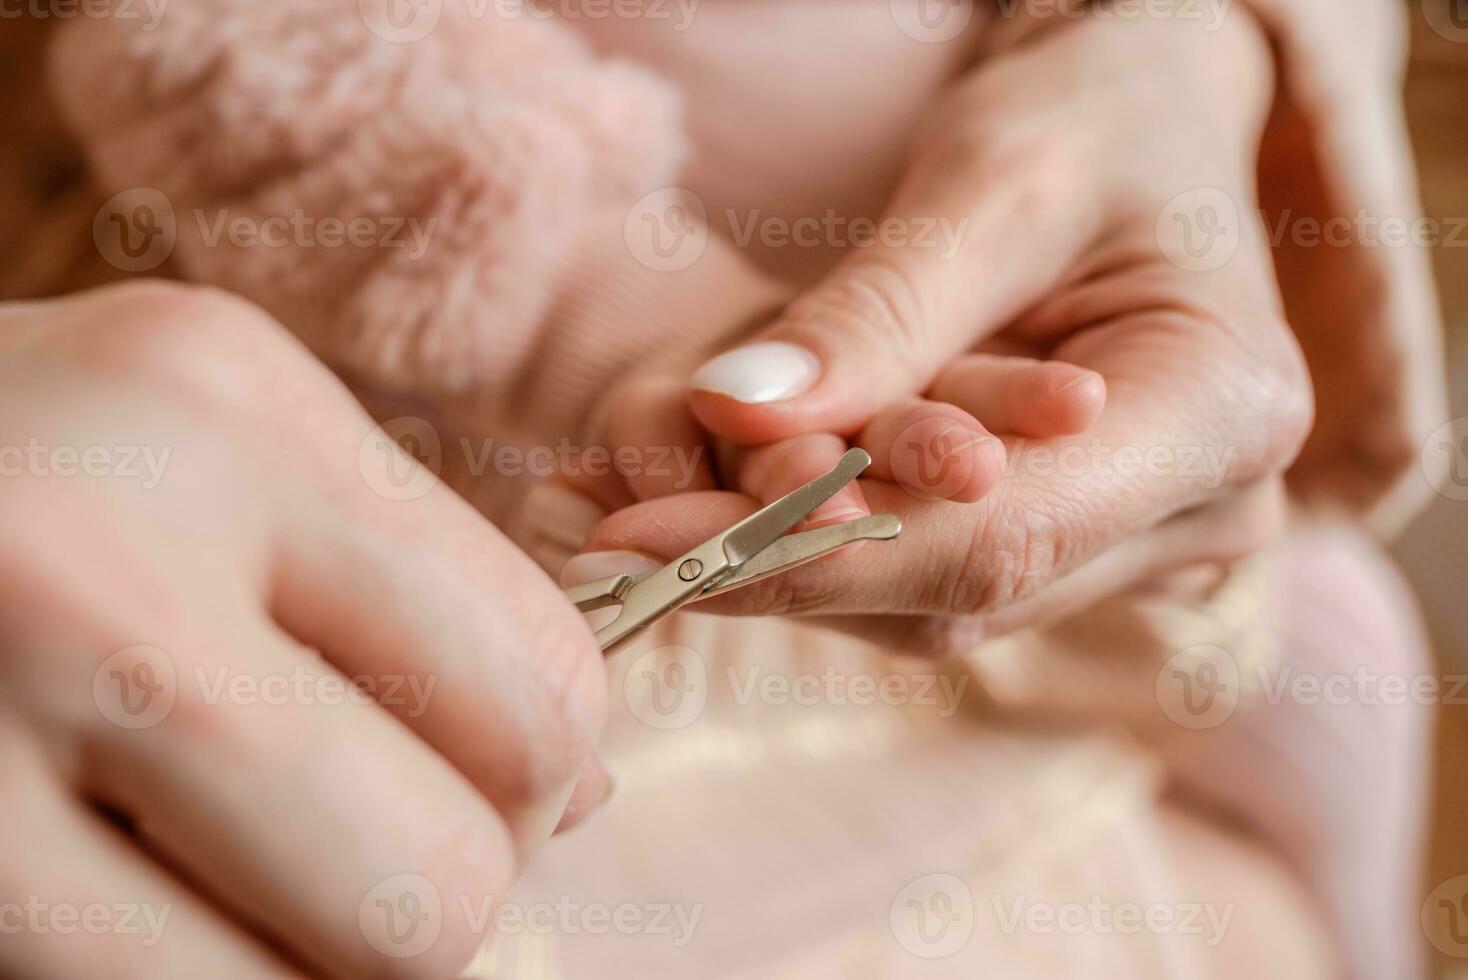 Mom cut the child's nails at home photo